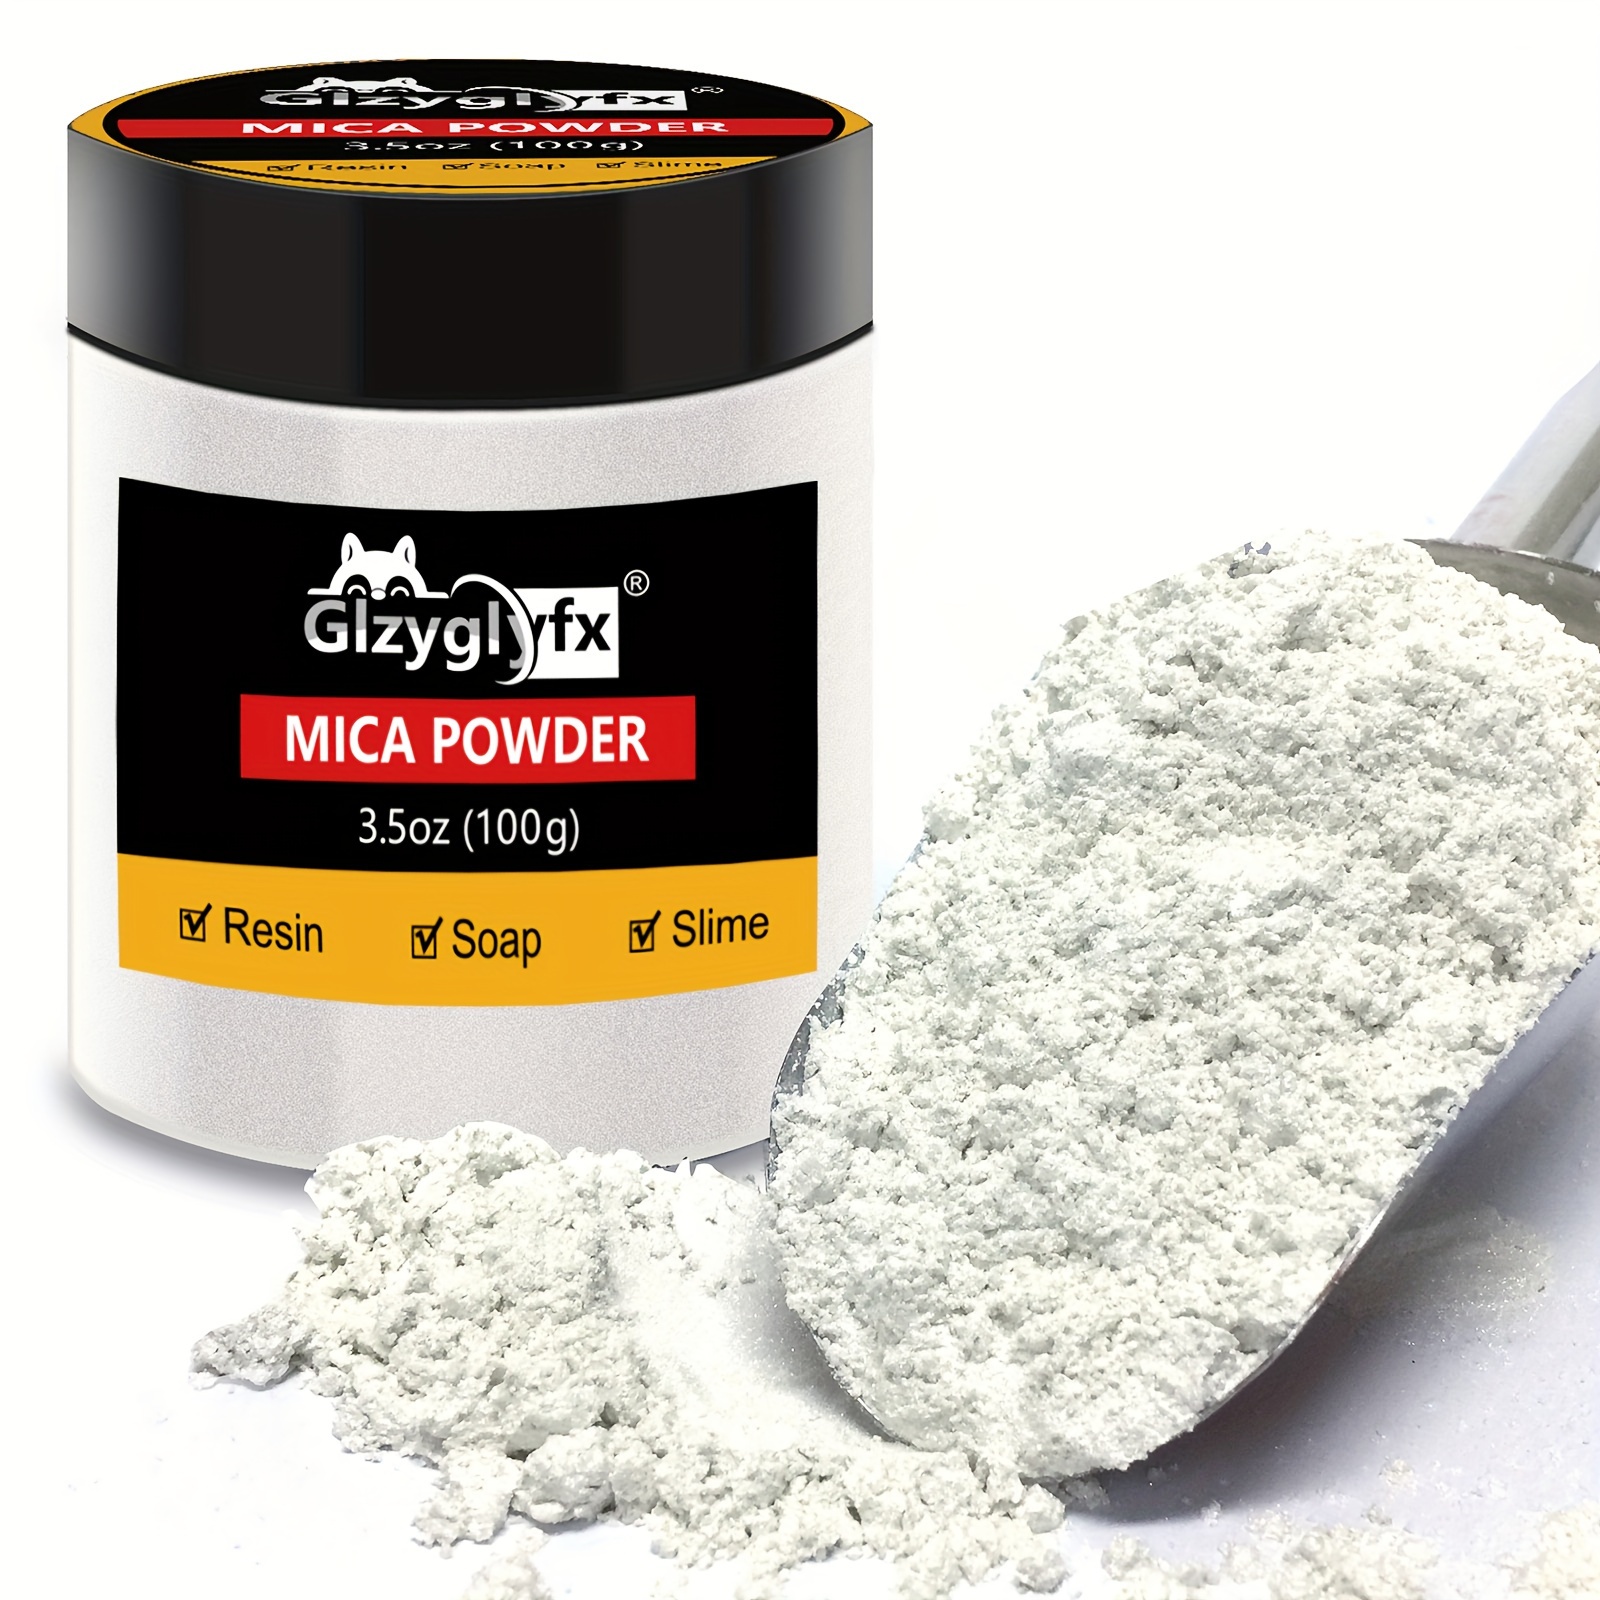  New So Soapy Organic Mica Powder for Soap Making kit